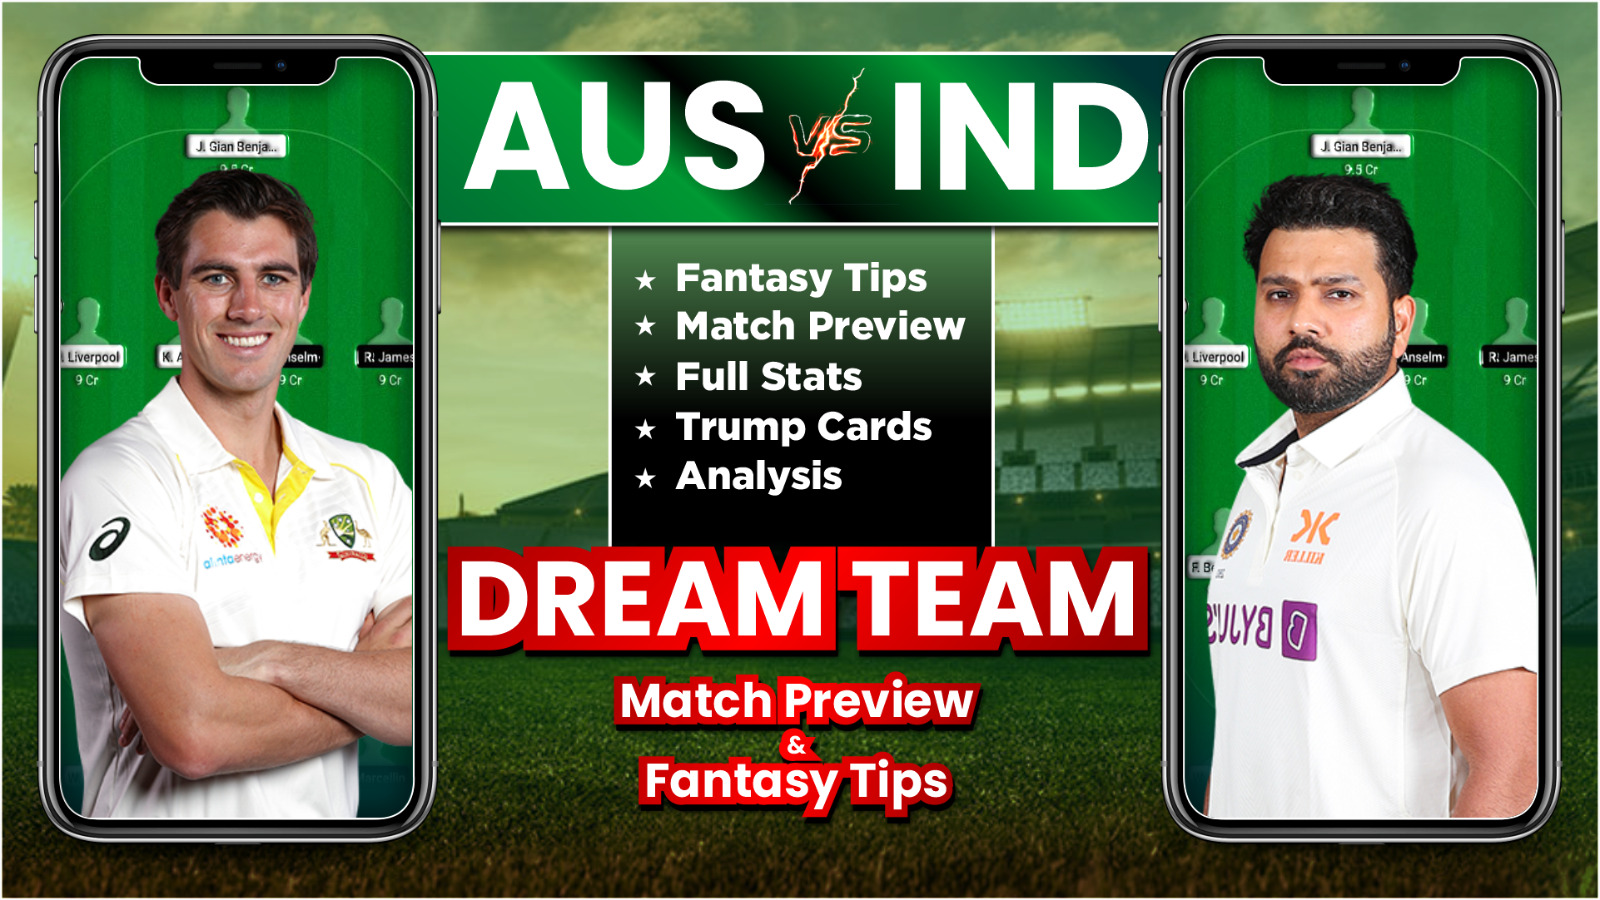 IND vs AUS Dream11 Team Prediction, Player Stats, Possible11, Pitch Report, Matchups